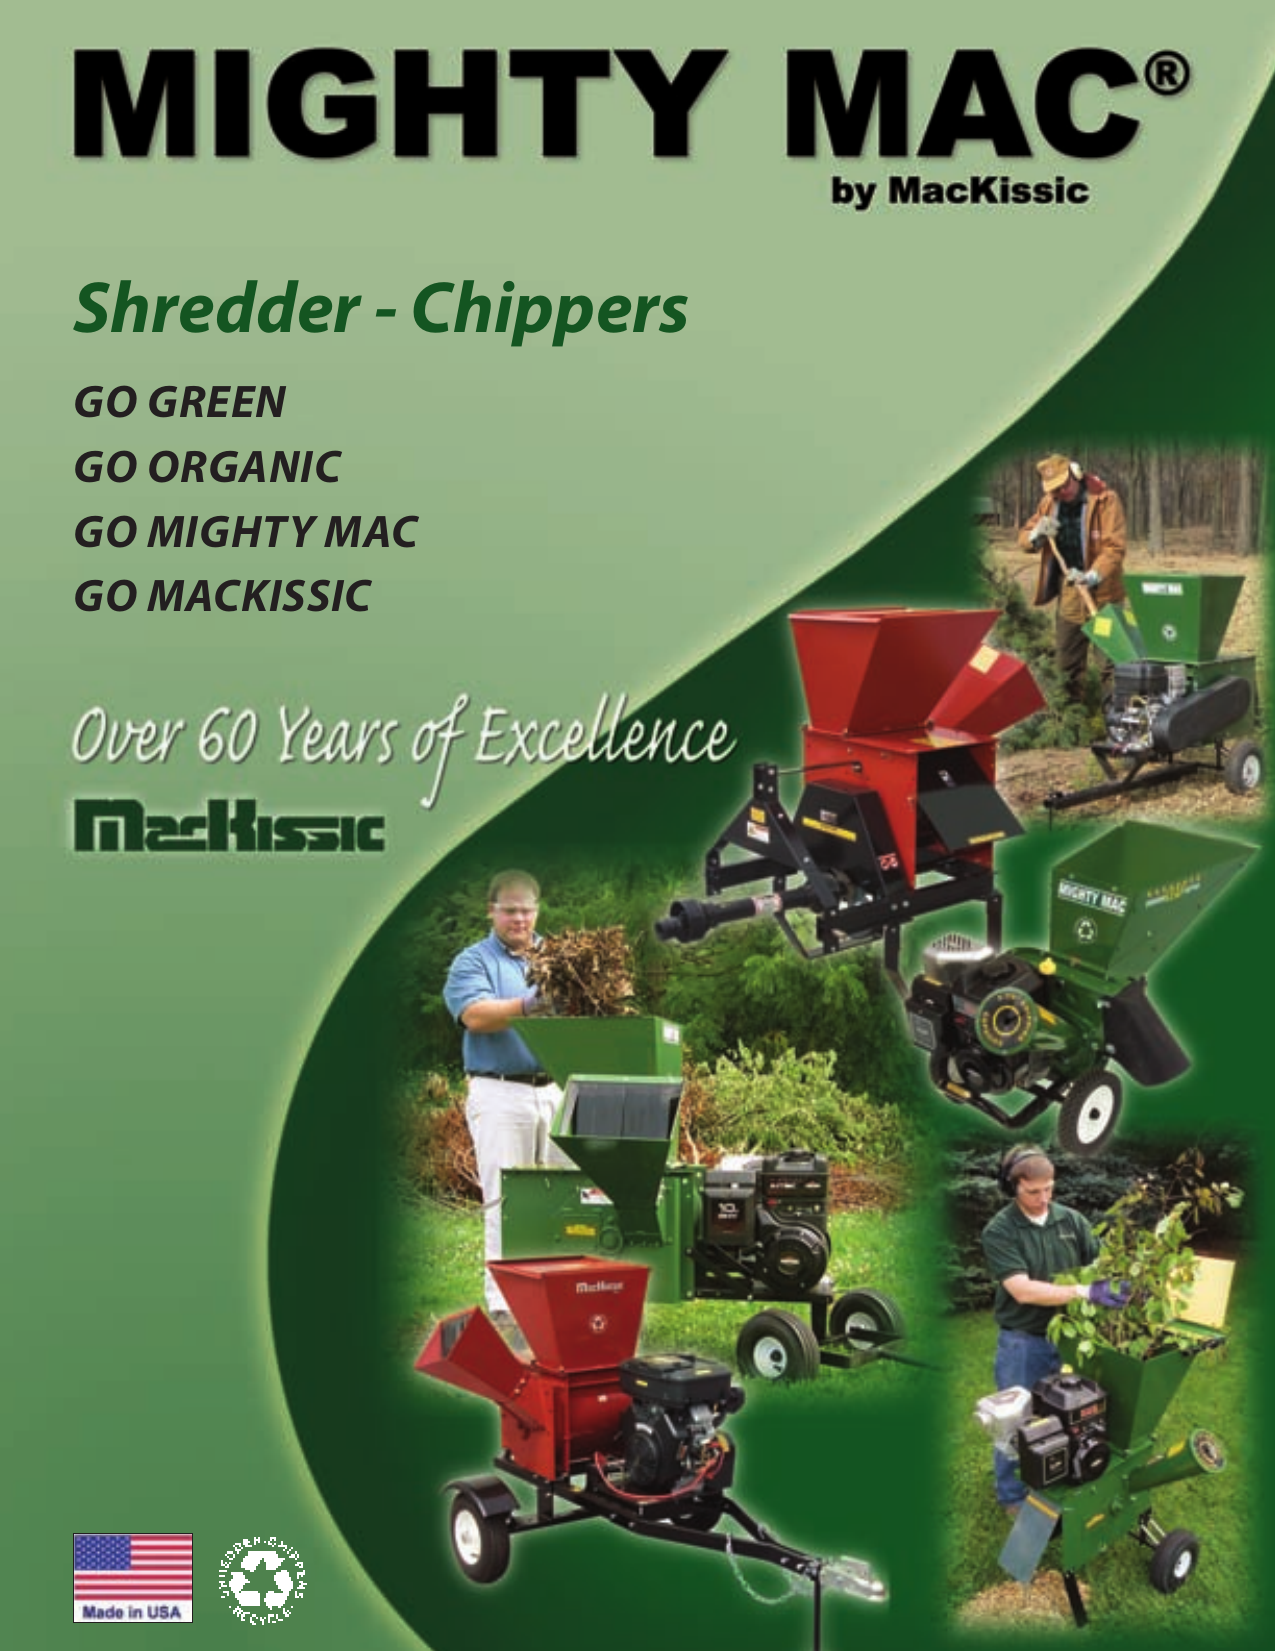 Mighty mac chipper lsc800 owners manual pdf